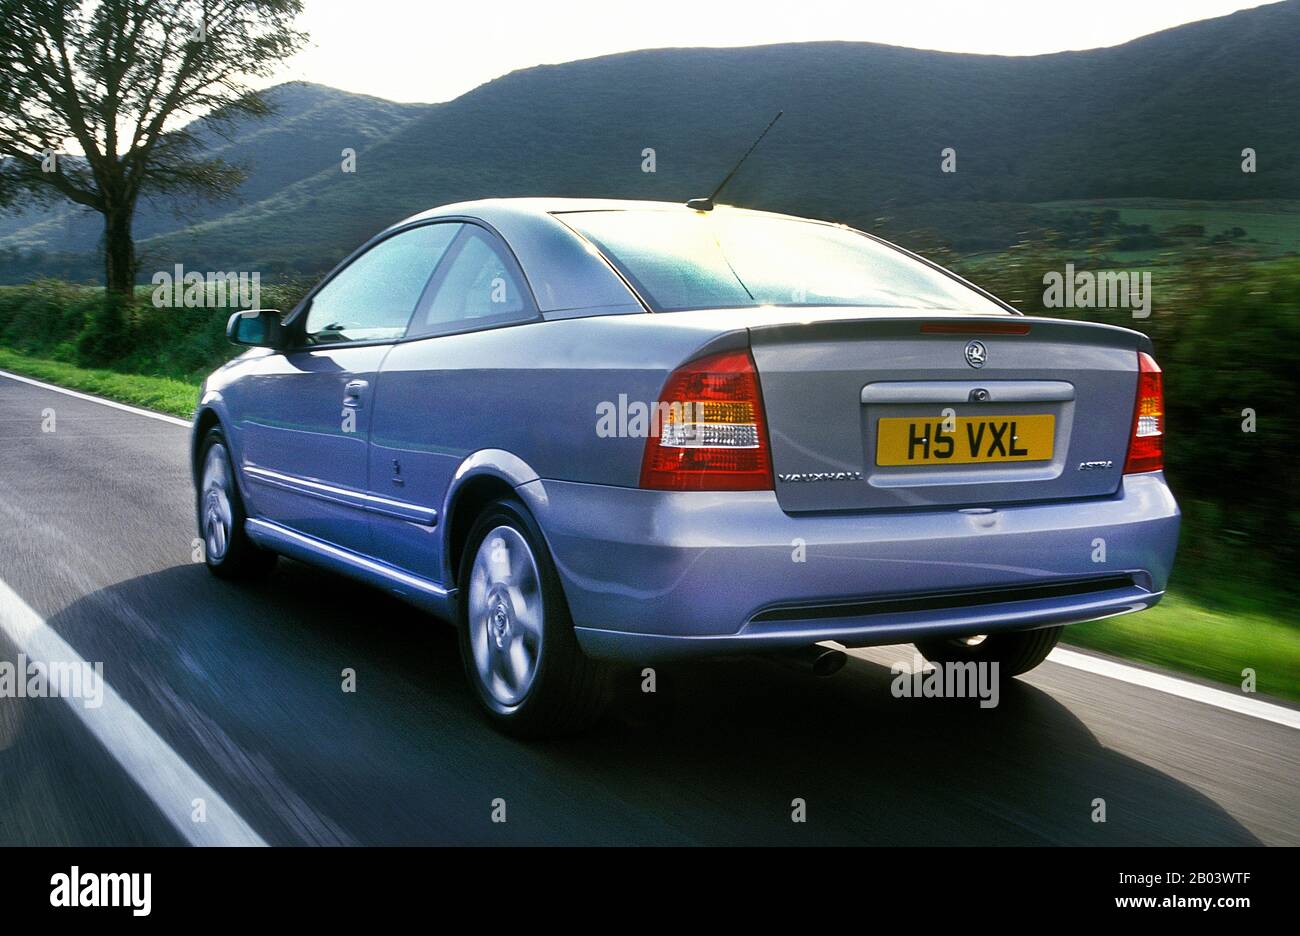 Opel Astra G Coupe Bertone Edition Stock Photo - Image of brcko